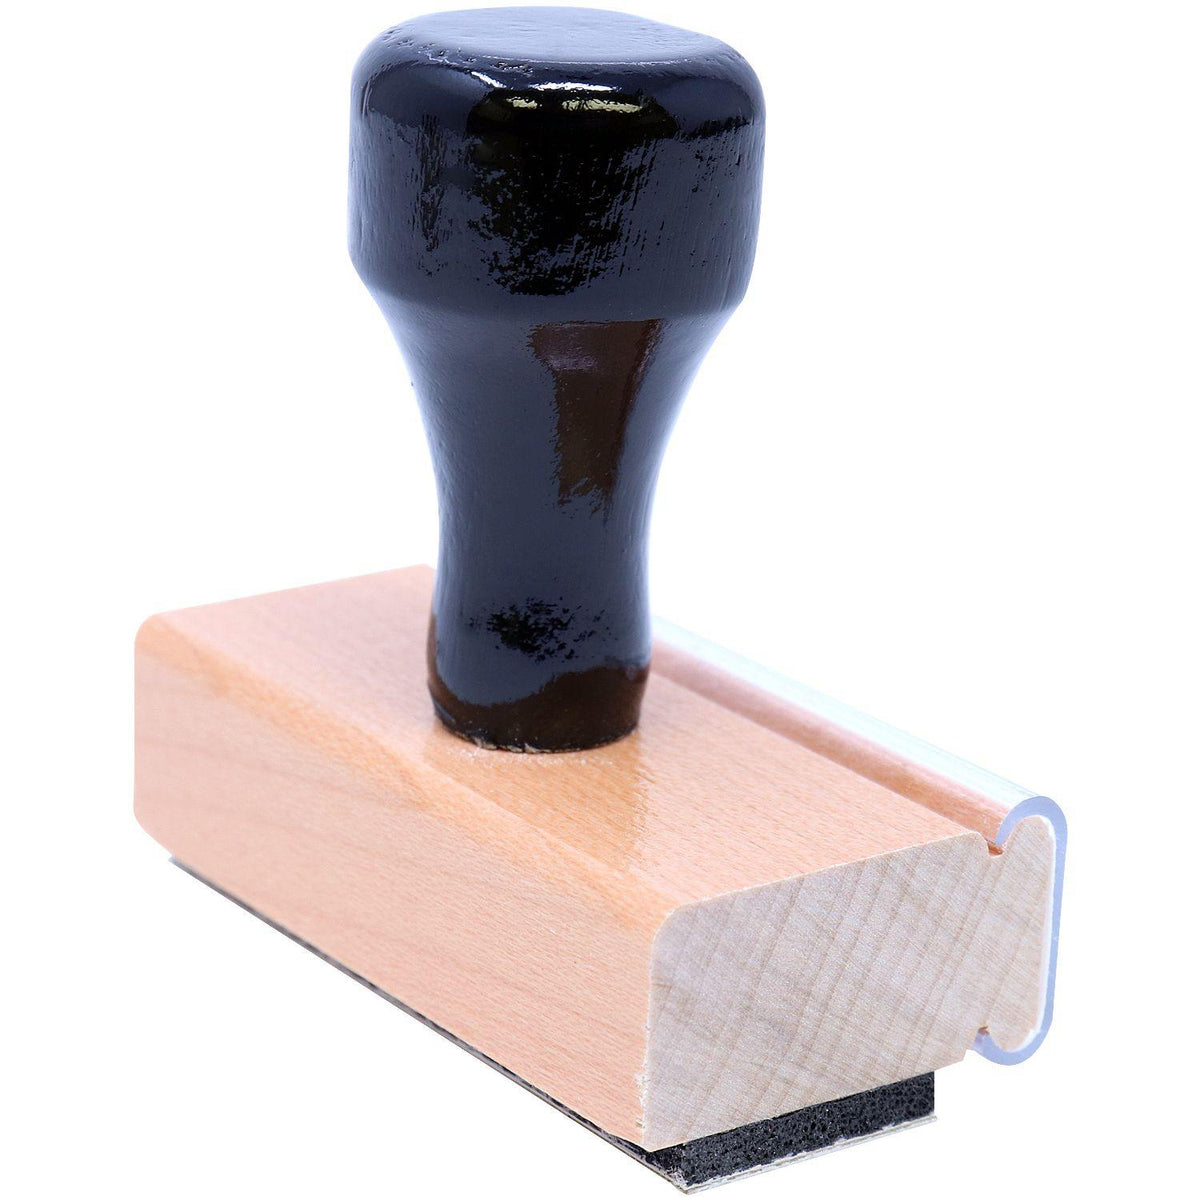 Narrow First Class Mail Rubber Stamp - Engineer Seal Stamps - Brand_Acorn, Impression Size_Small, Stamp Type_Regular Stamp, Type of Use_Business, Type of Use_Office, Type of Use_Postal &amp; Mailing, Type of Use_Professional